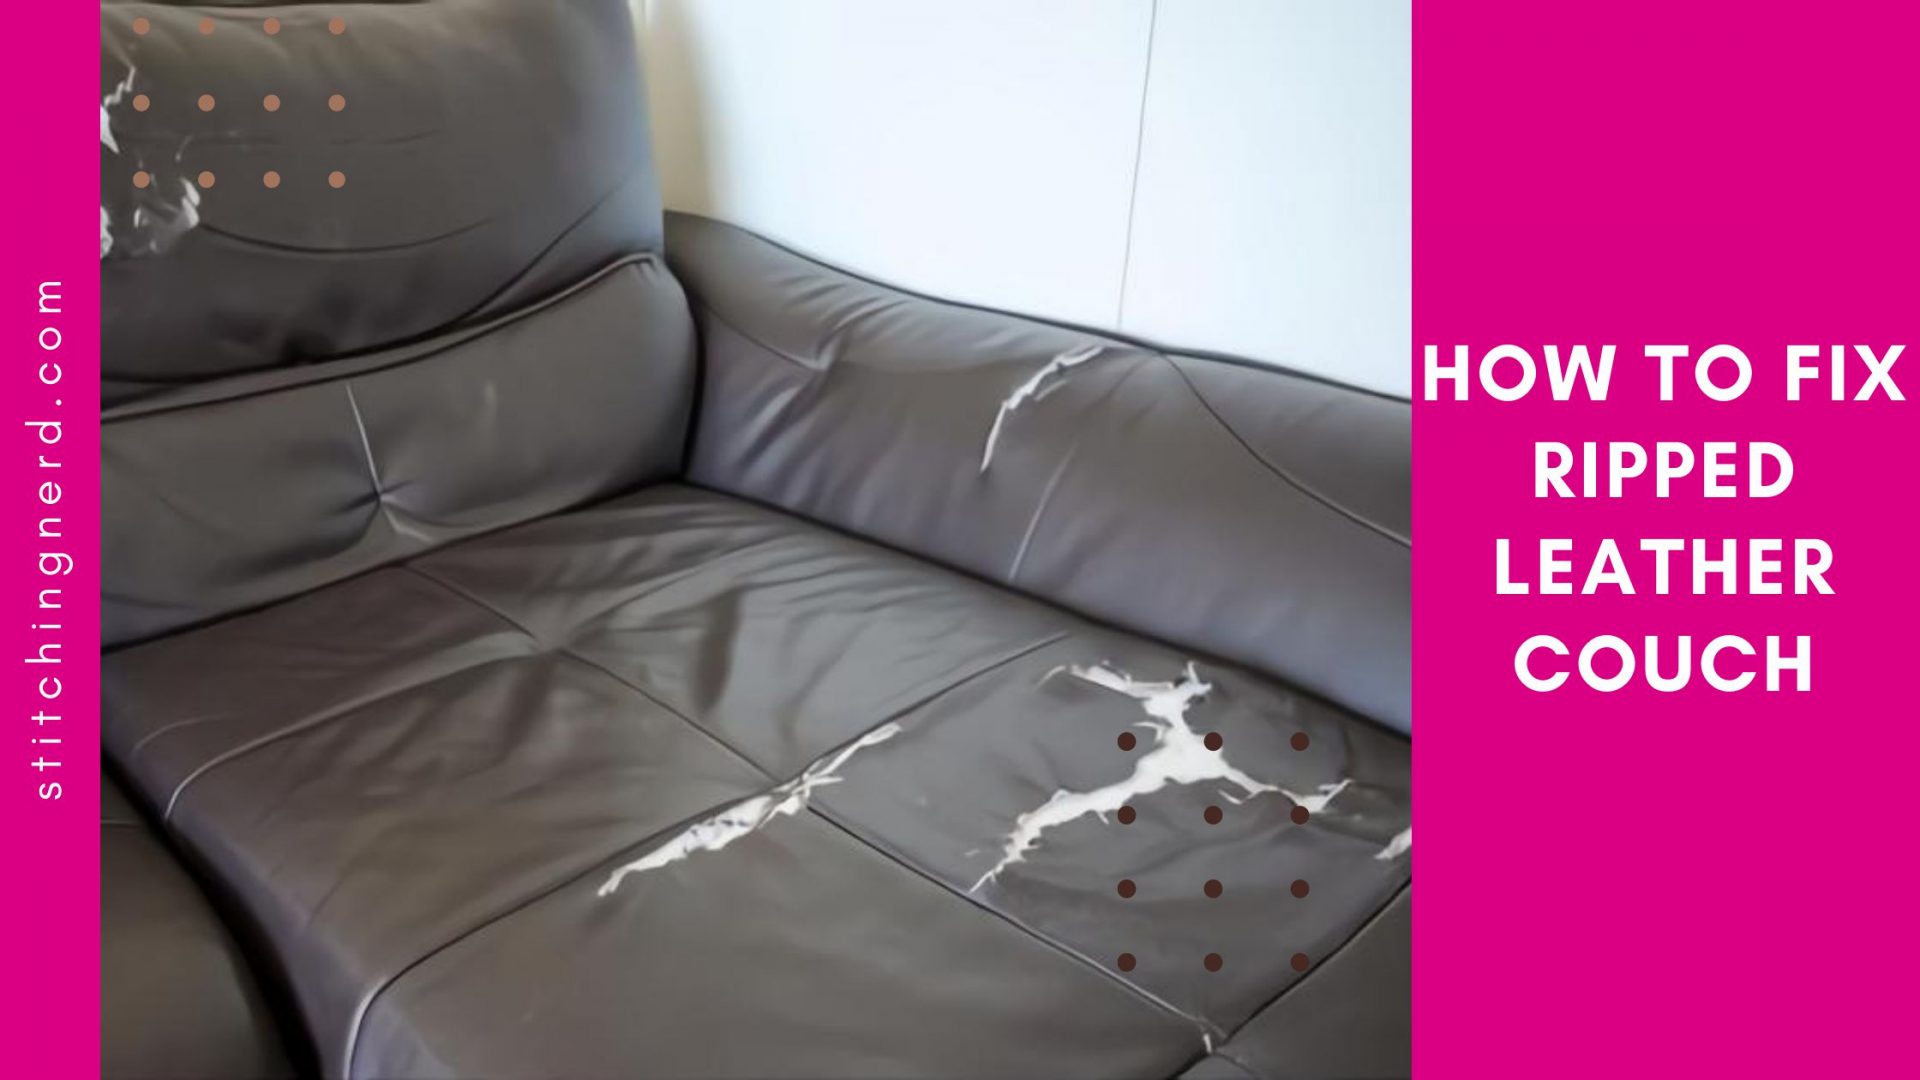 How to Fix Ripped Leather Couch